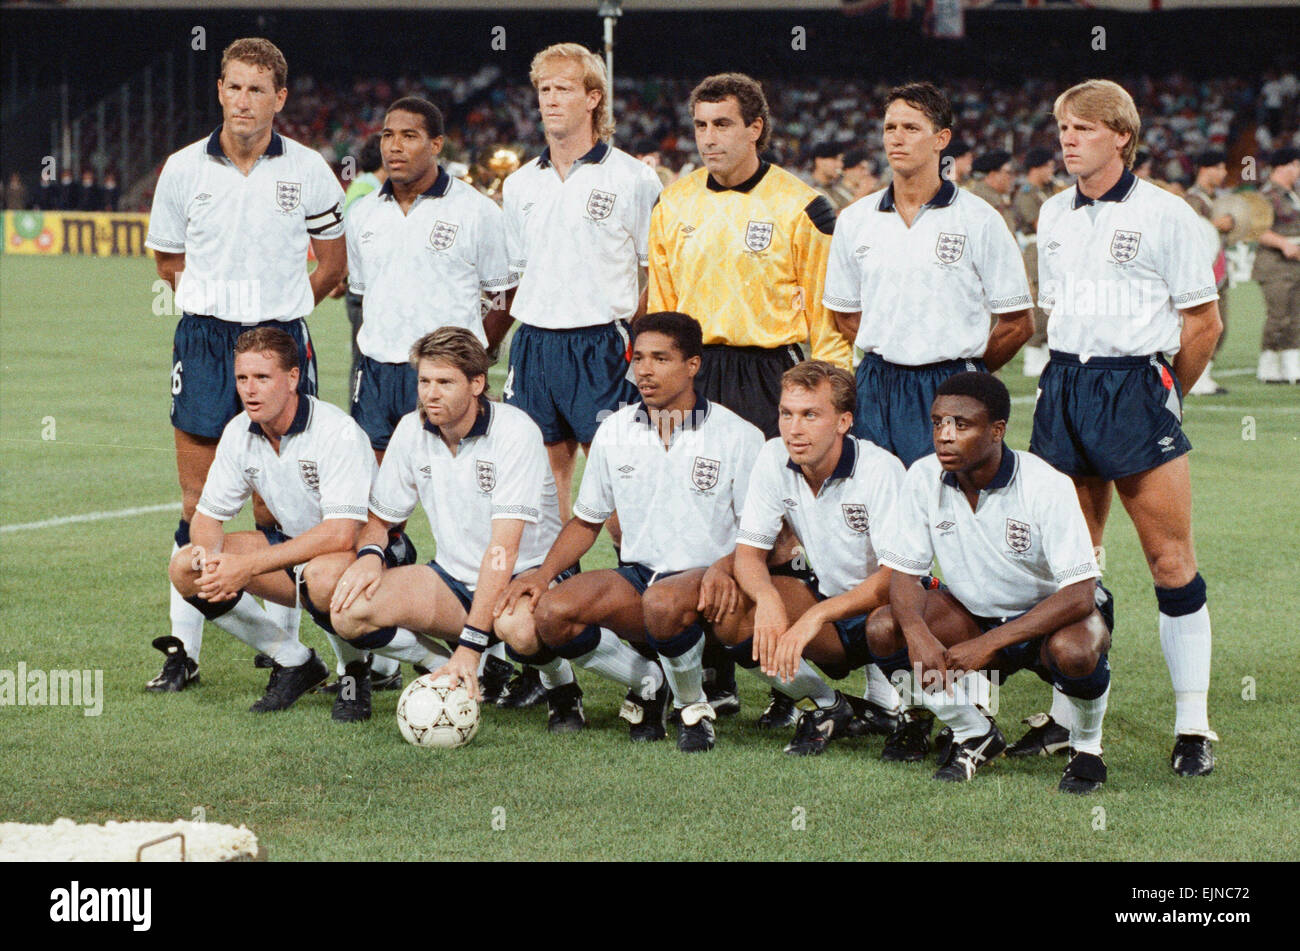 1990 World Cup Quarter Final match in Naples, Italy. England 3 v Cameroon 2 after extra time. The England team line up before the match. They are back row left to right: Terry Butcher, John Barnes, Mark Wright, Peter Shilton, Gary Lineker and Stuart Pearce. Front row: Paul Gascoigne, Chris Waddle, Des Walker, David Platt and Paul Parker. 1st July 1990. Stock Photo